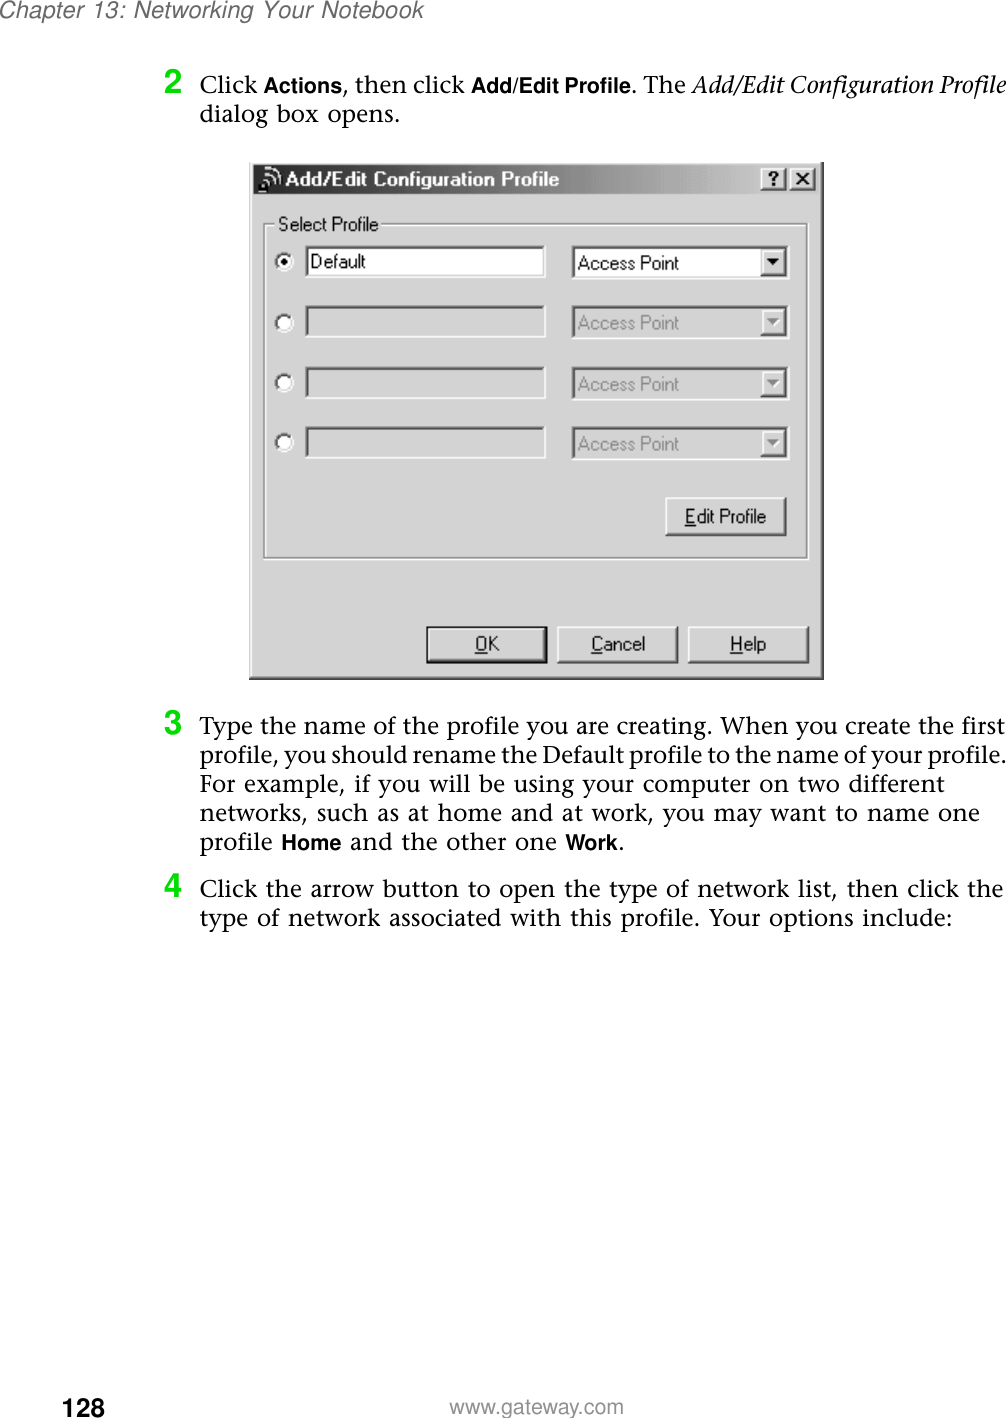 128Chapter 13: Networking Your Notebookwww.gateway.com2Click Actions, then click Add/Edit Profile. The Add/Edit Configuration Profile dialog box opens.3Type the name of the profile you are creating. When you create the first profile, you should rename the Default profile to the name of your profile. For example, if you will be using your computer on two different networks, such as at home and at work, you may want to name one profile Home and the other one Work. 4Click the arrow button to open the type of network list, then click the type of network associated with this profile. Your options include: